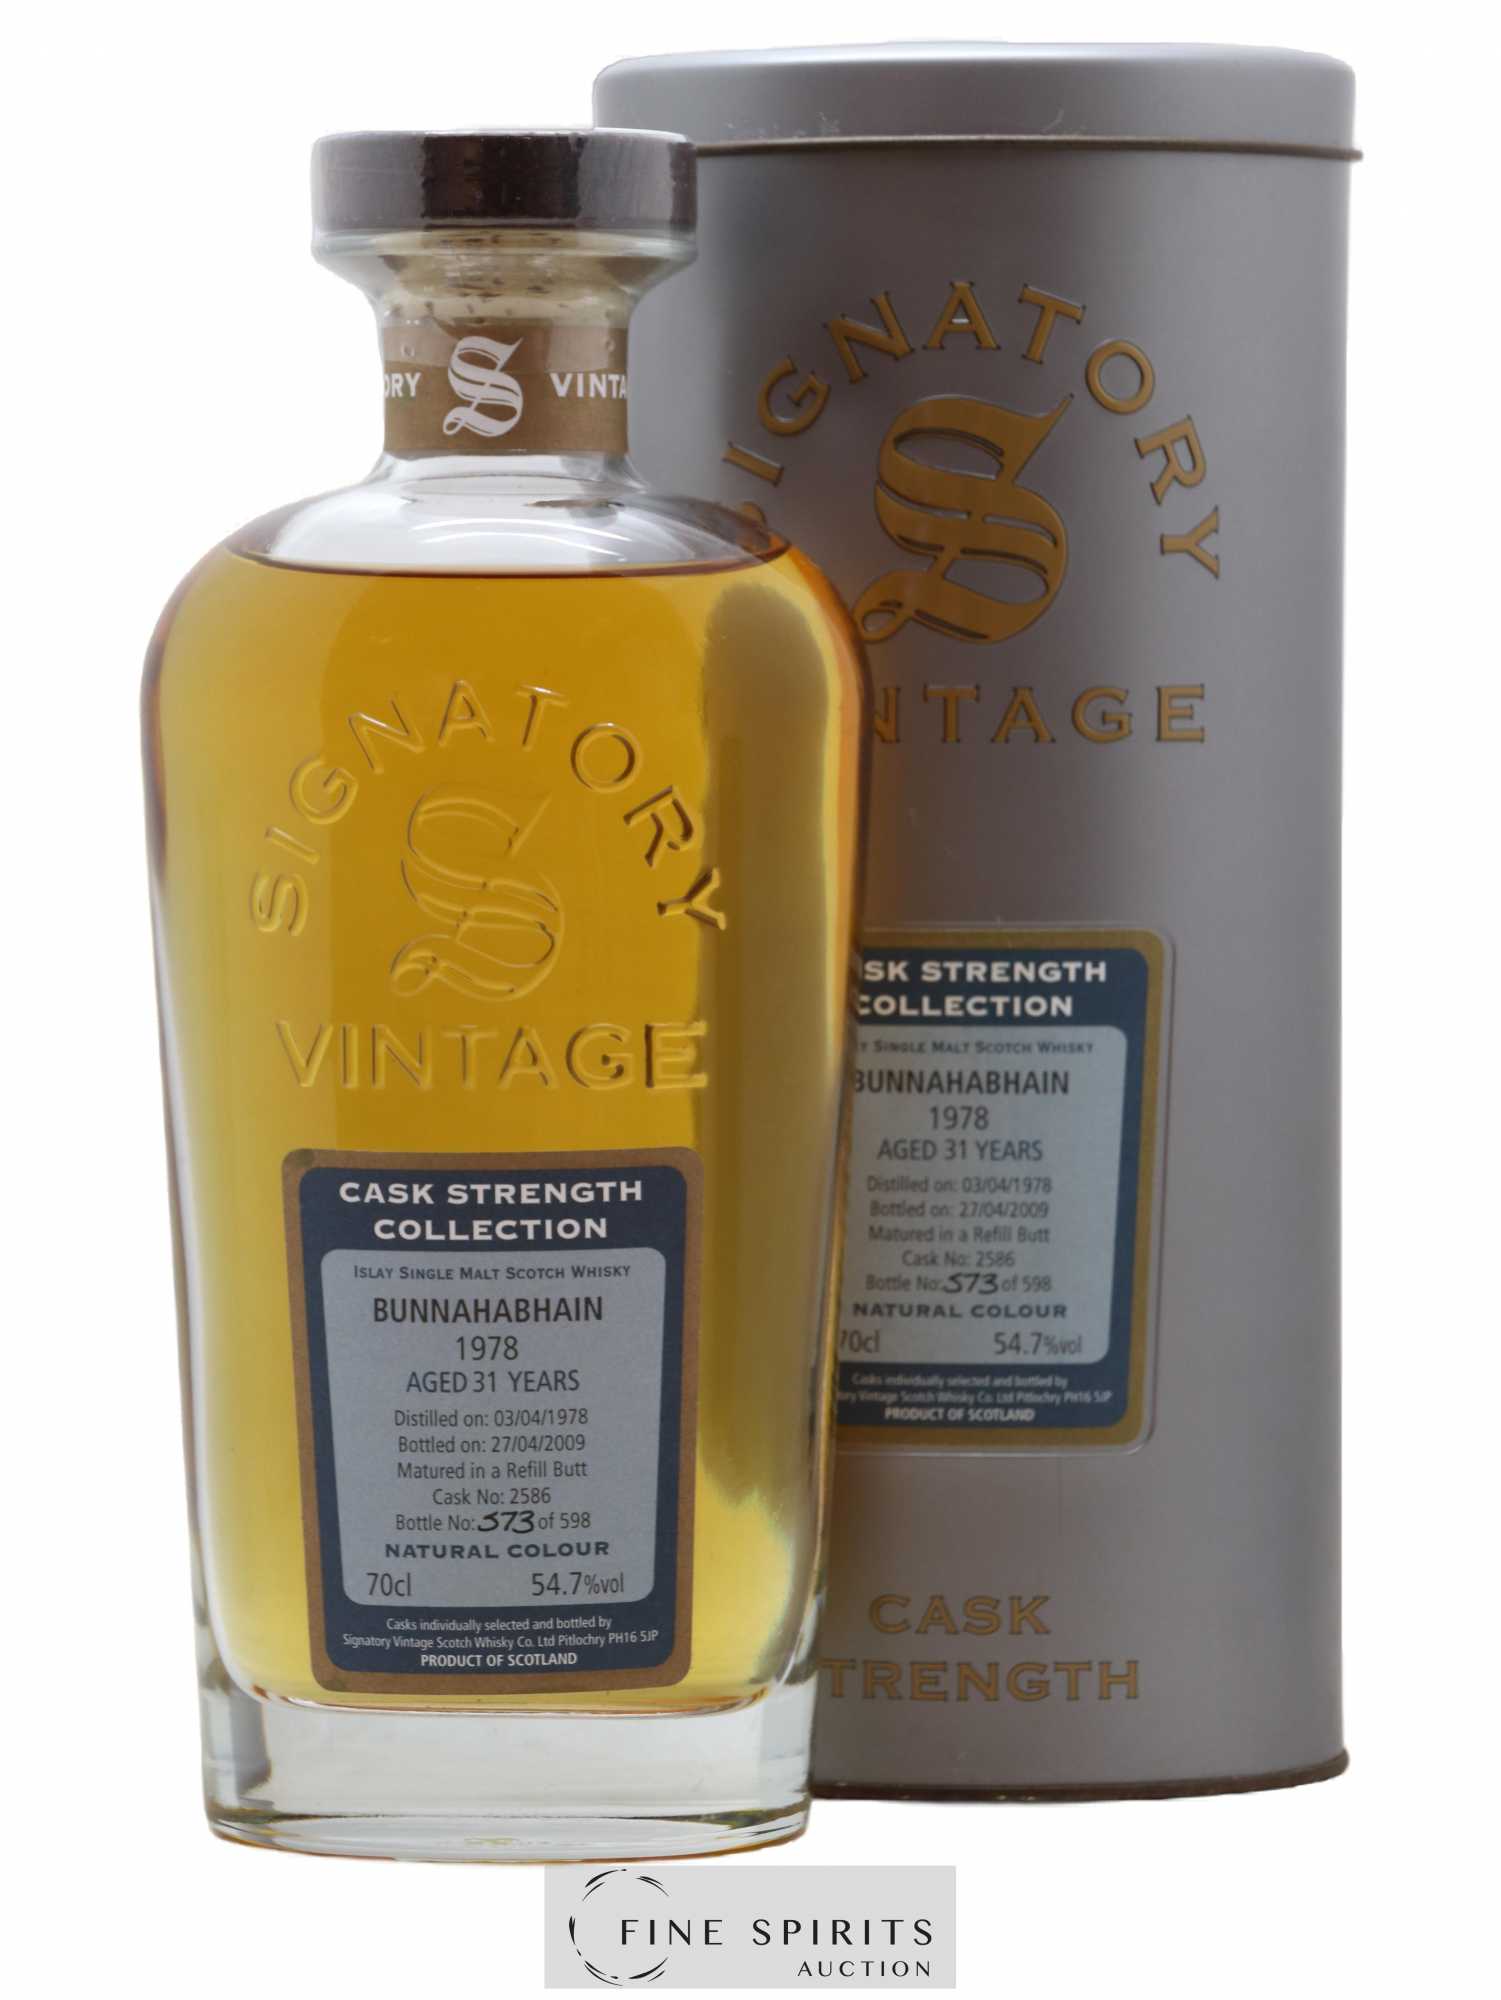 Bunnahabhain 31 years 1978 Signatory Vintage Refill Butt Cask n°2586 - One of 598 - bottled 2009 Cask Strength Collection